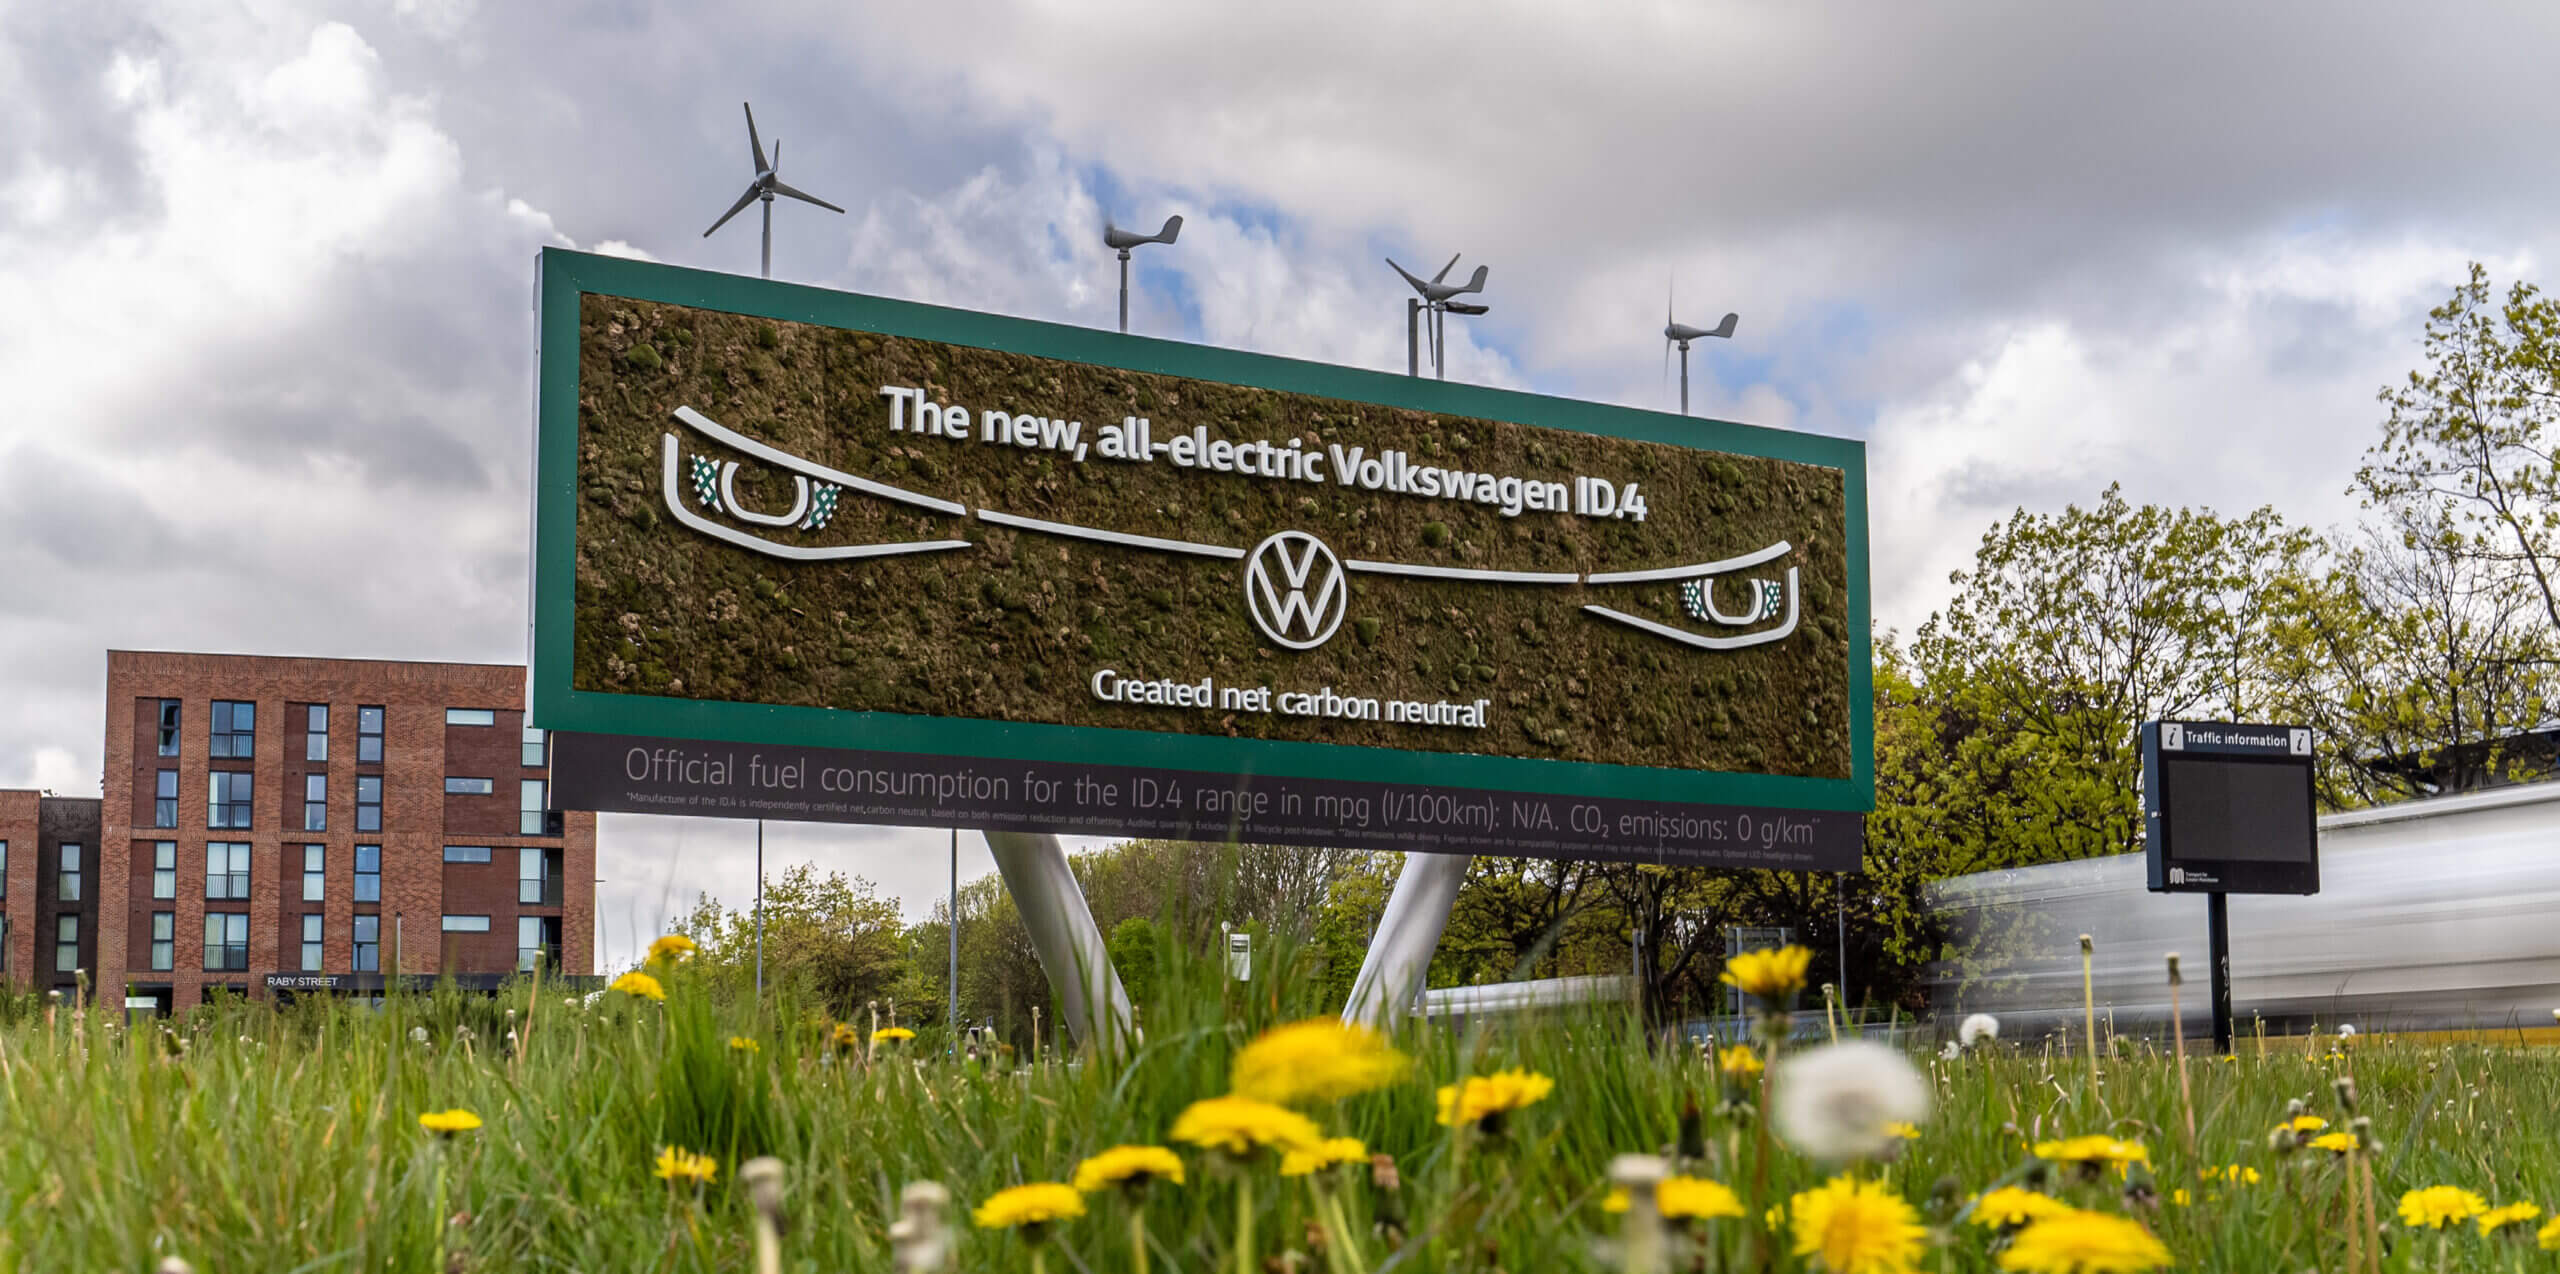 The Volkswagen ID.4 Living Billboard in the daylight. The solar panels and wind turbines work hard to power the billboard later on in the evening.